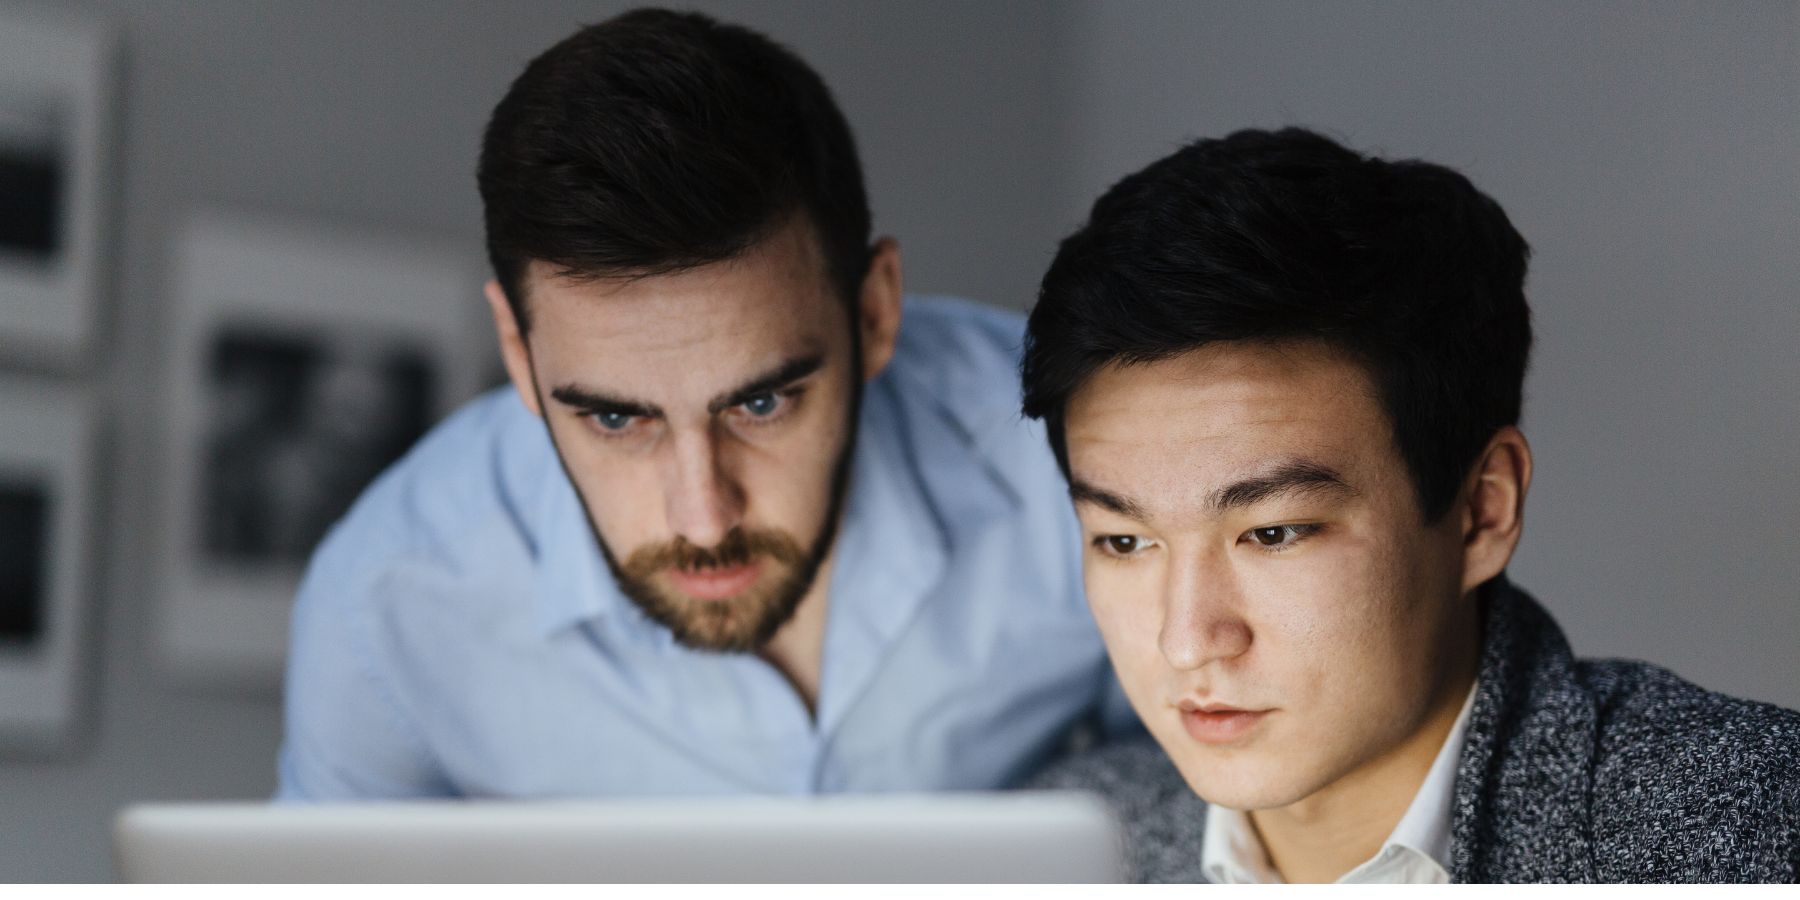 Two men looking sternly at the computer screen.